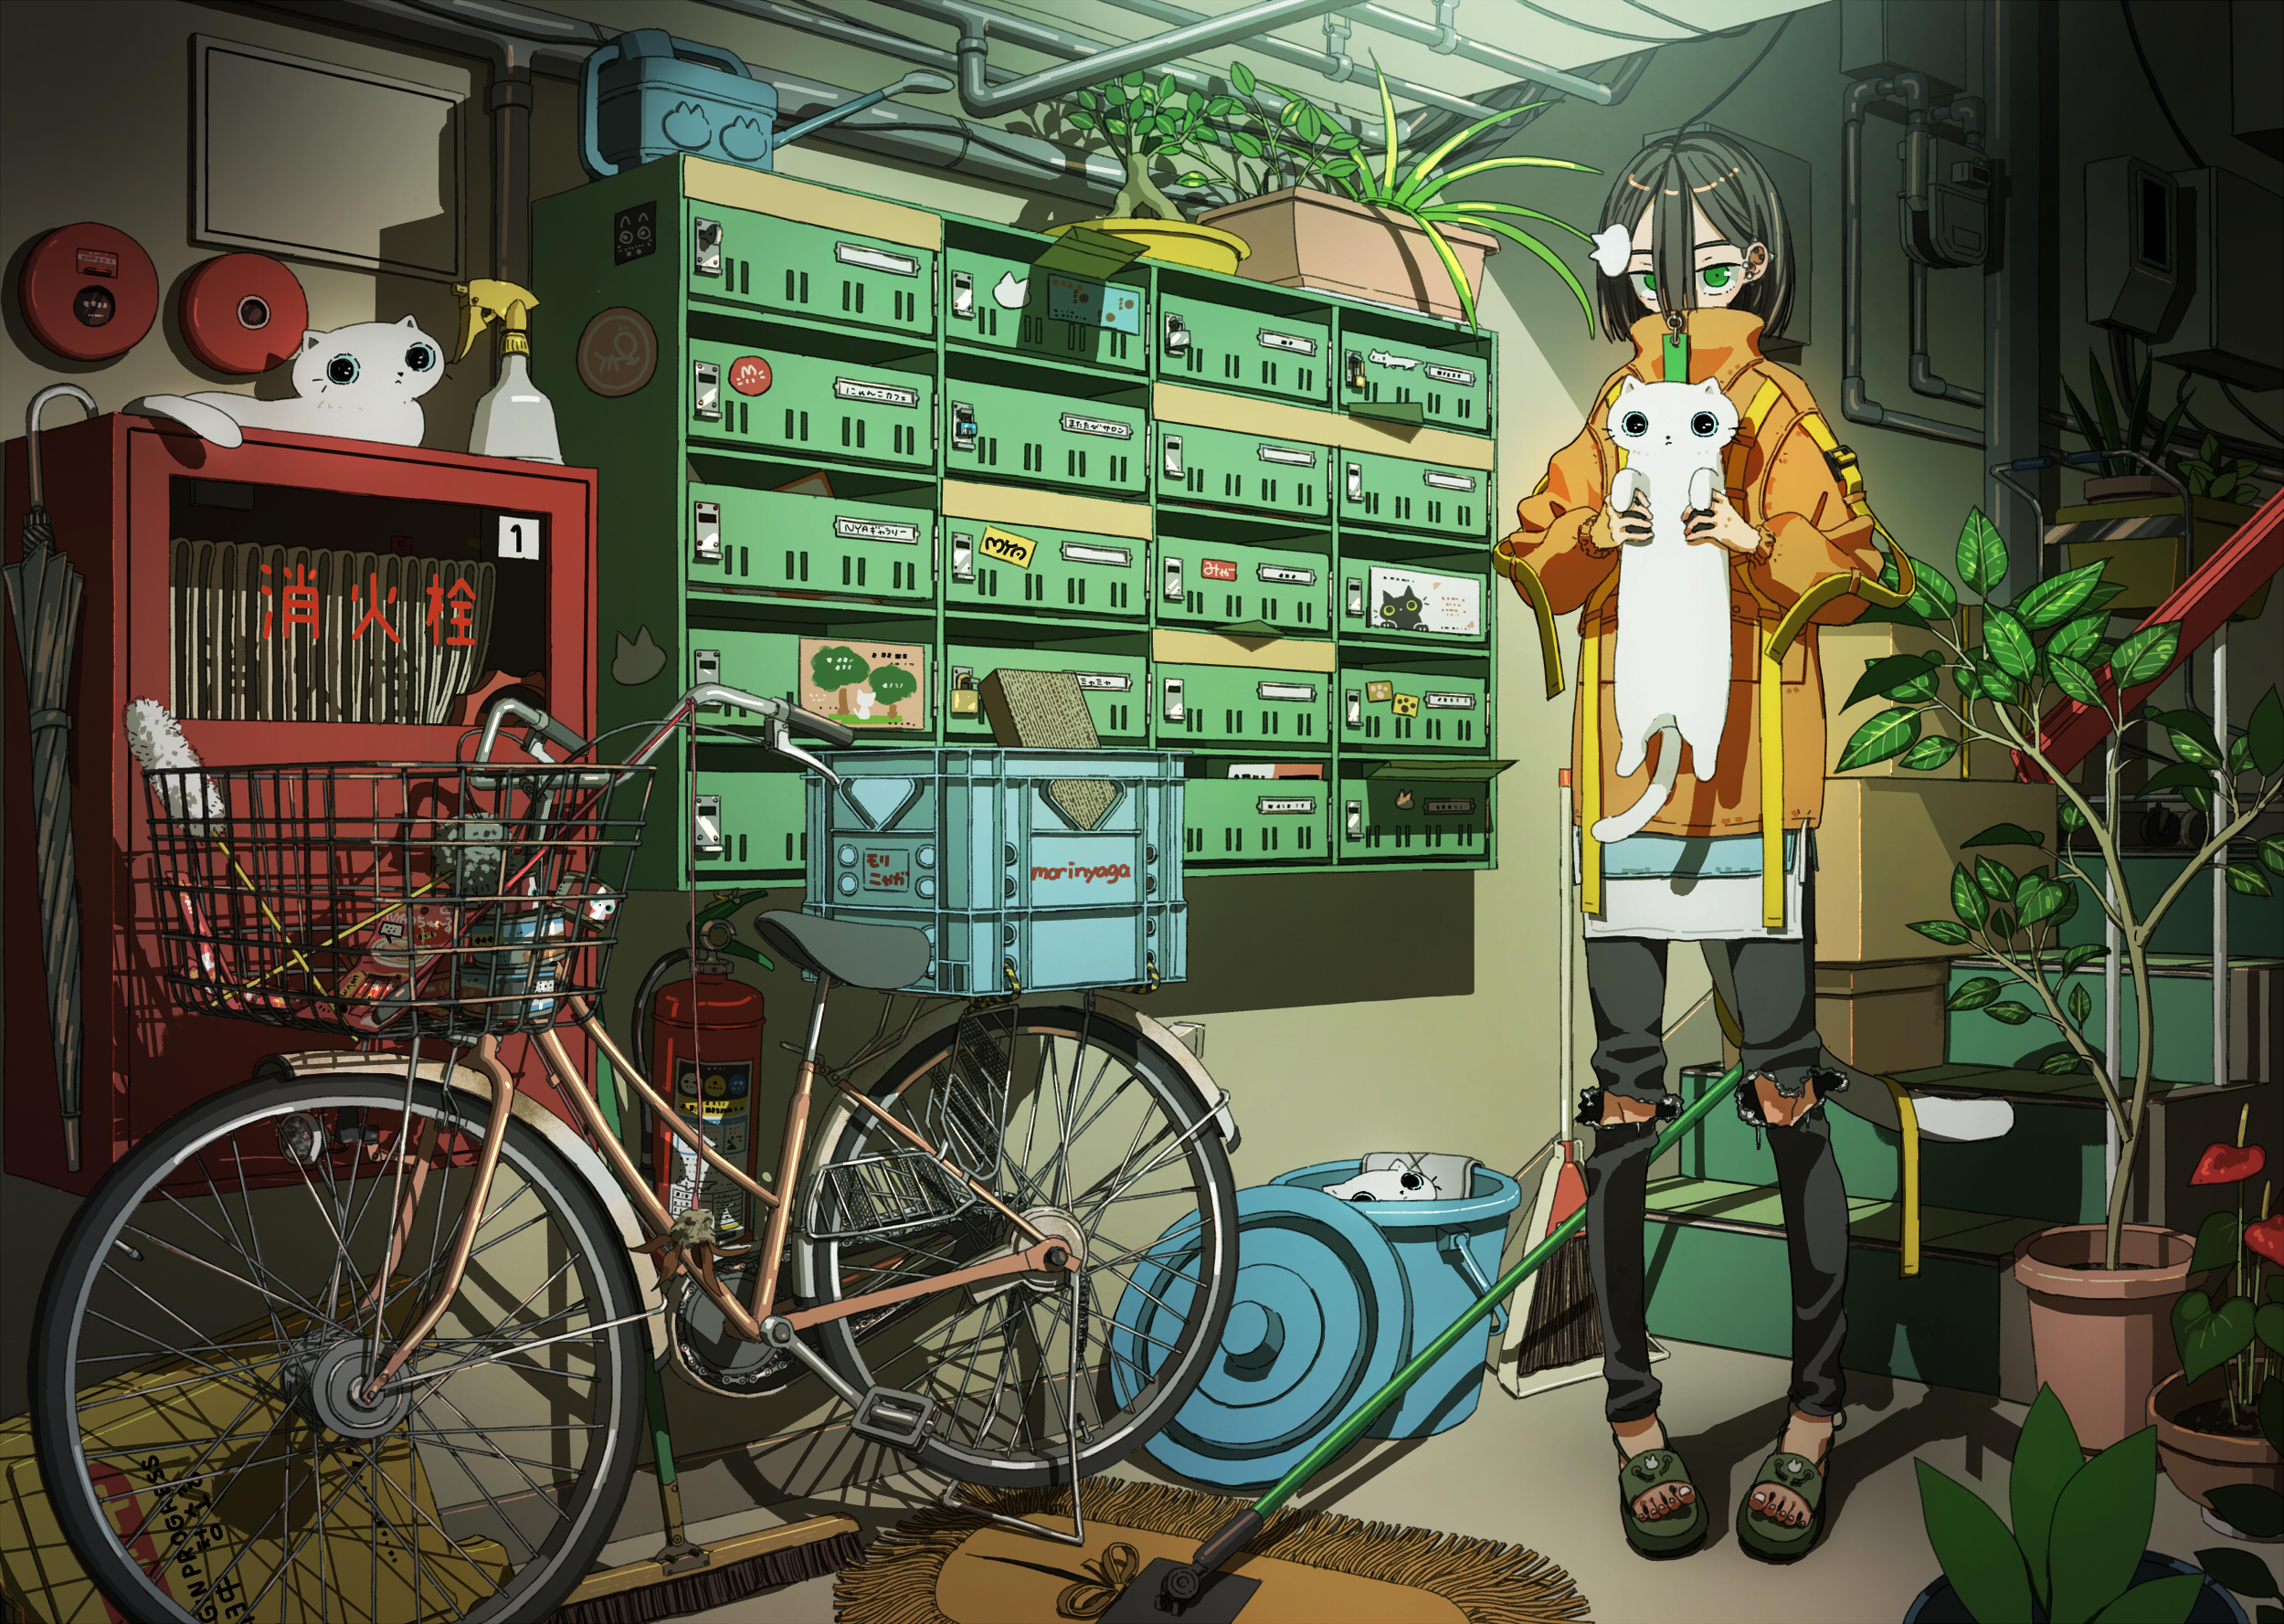 Anime 2500x1778 anime anime girls dark hair short hair flowerpot flowers umbrella pipes mailbox stairs bucket broom fire extinguishers green eyes tail jacket ribbon boxes bicycle Pixiv vehicle women with bicycles plants